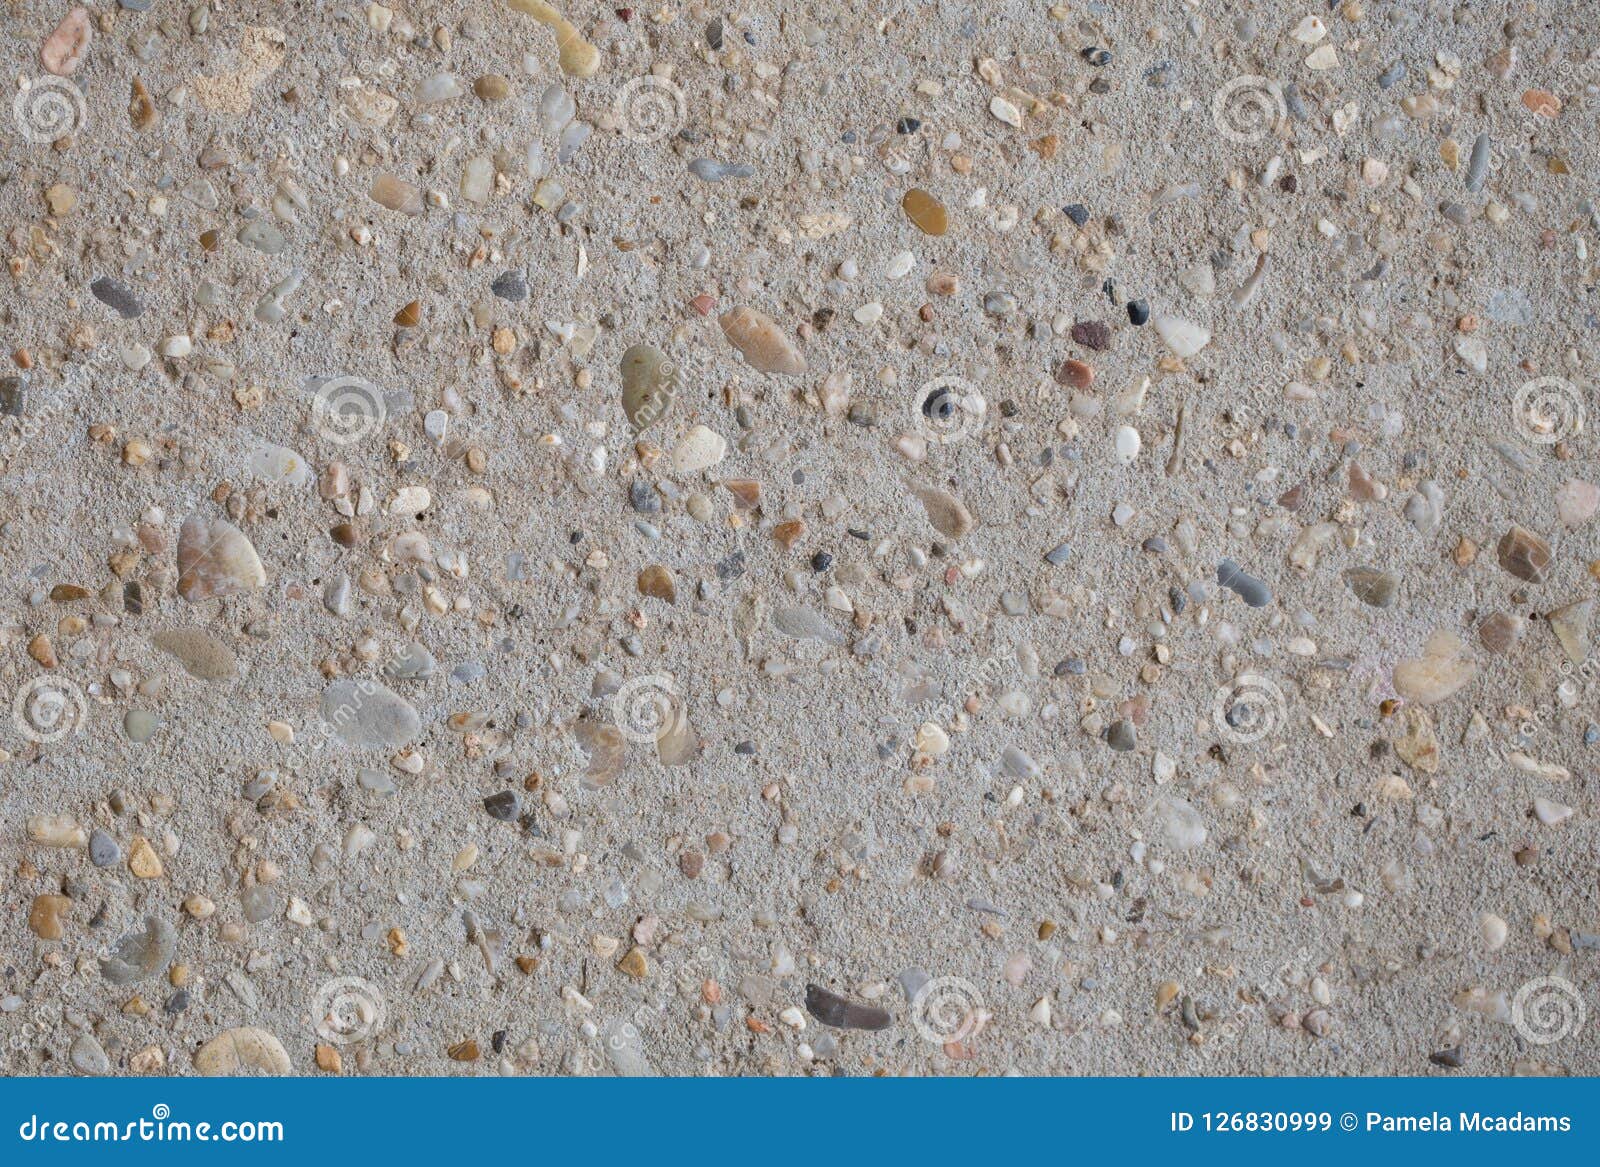 Dried Cement with Pebbles stock image. Image of rocks - 126830999